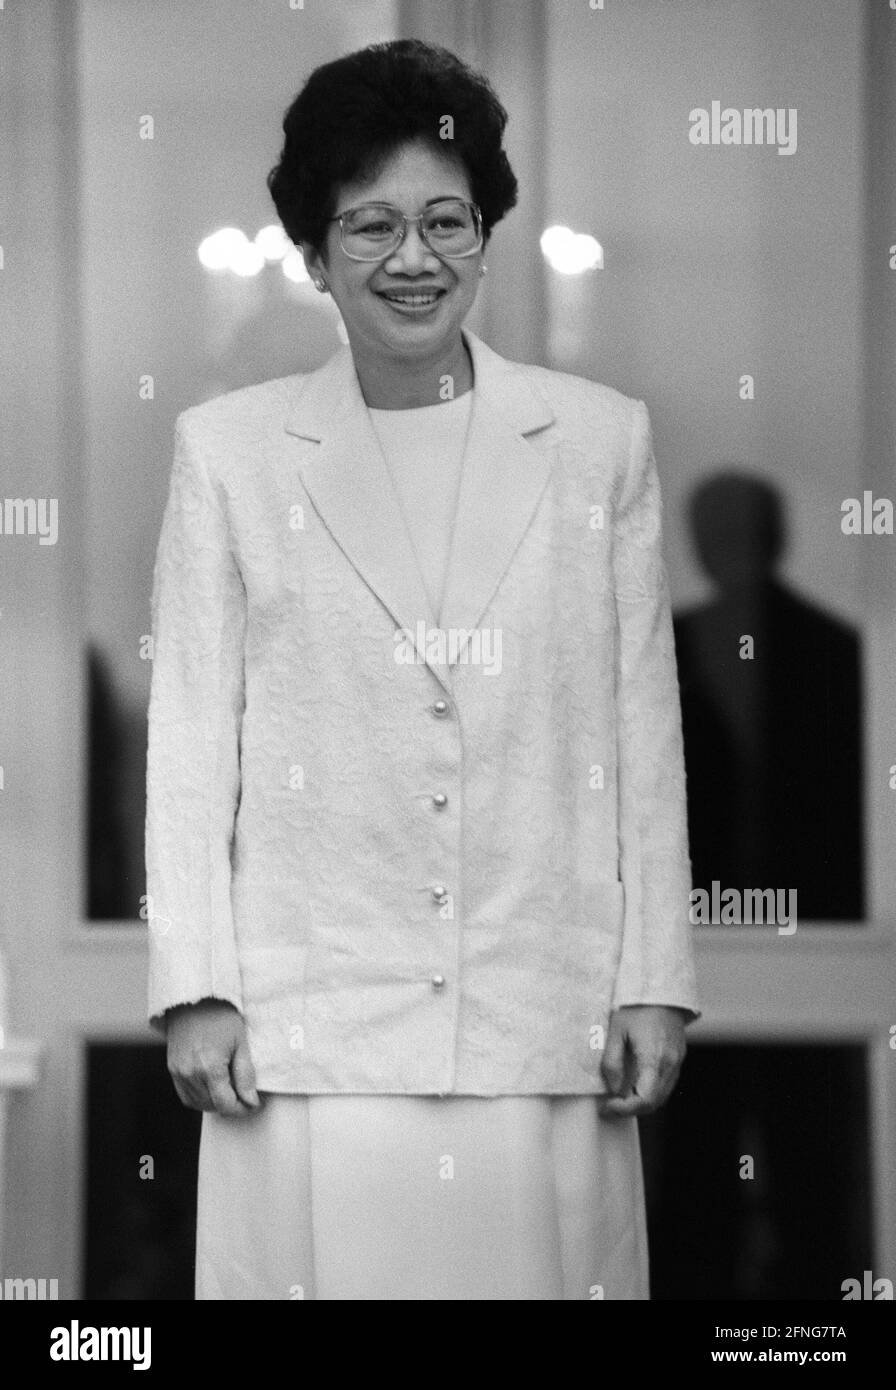 Germany, Bonn, 11.07.1989. Archive No: 07-11-20 State visit of the President of the Philippines Photo: President Corazon Aquino [automated translation] Stock Photo